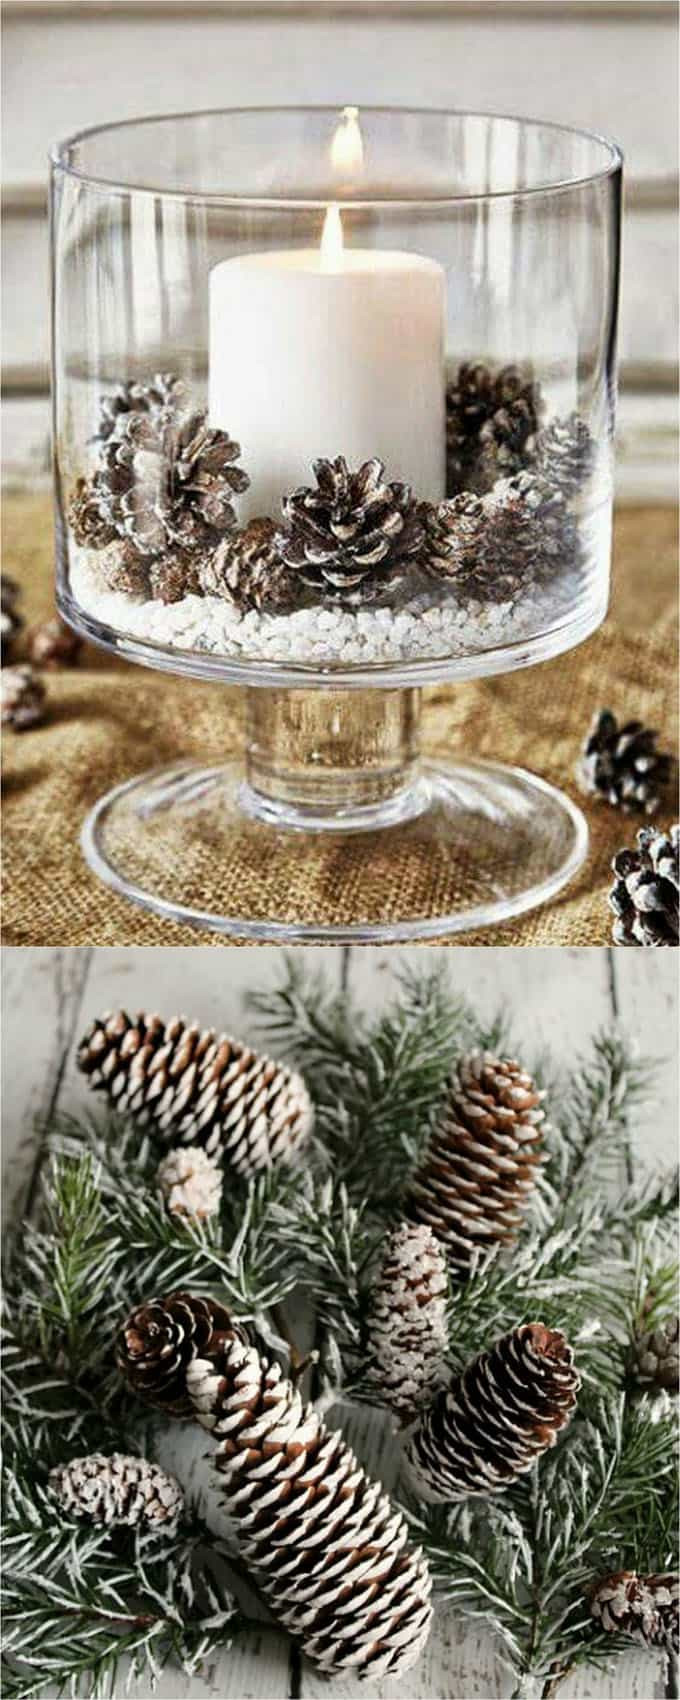 Christmas Table Decorations To Make
 27 Gorgeous DIY Thanksgiving & Christmas Table Decorations